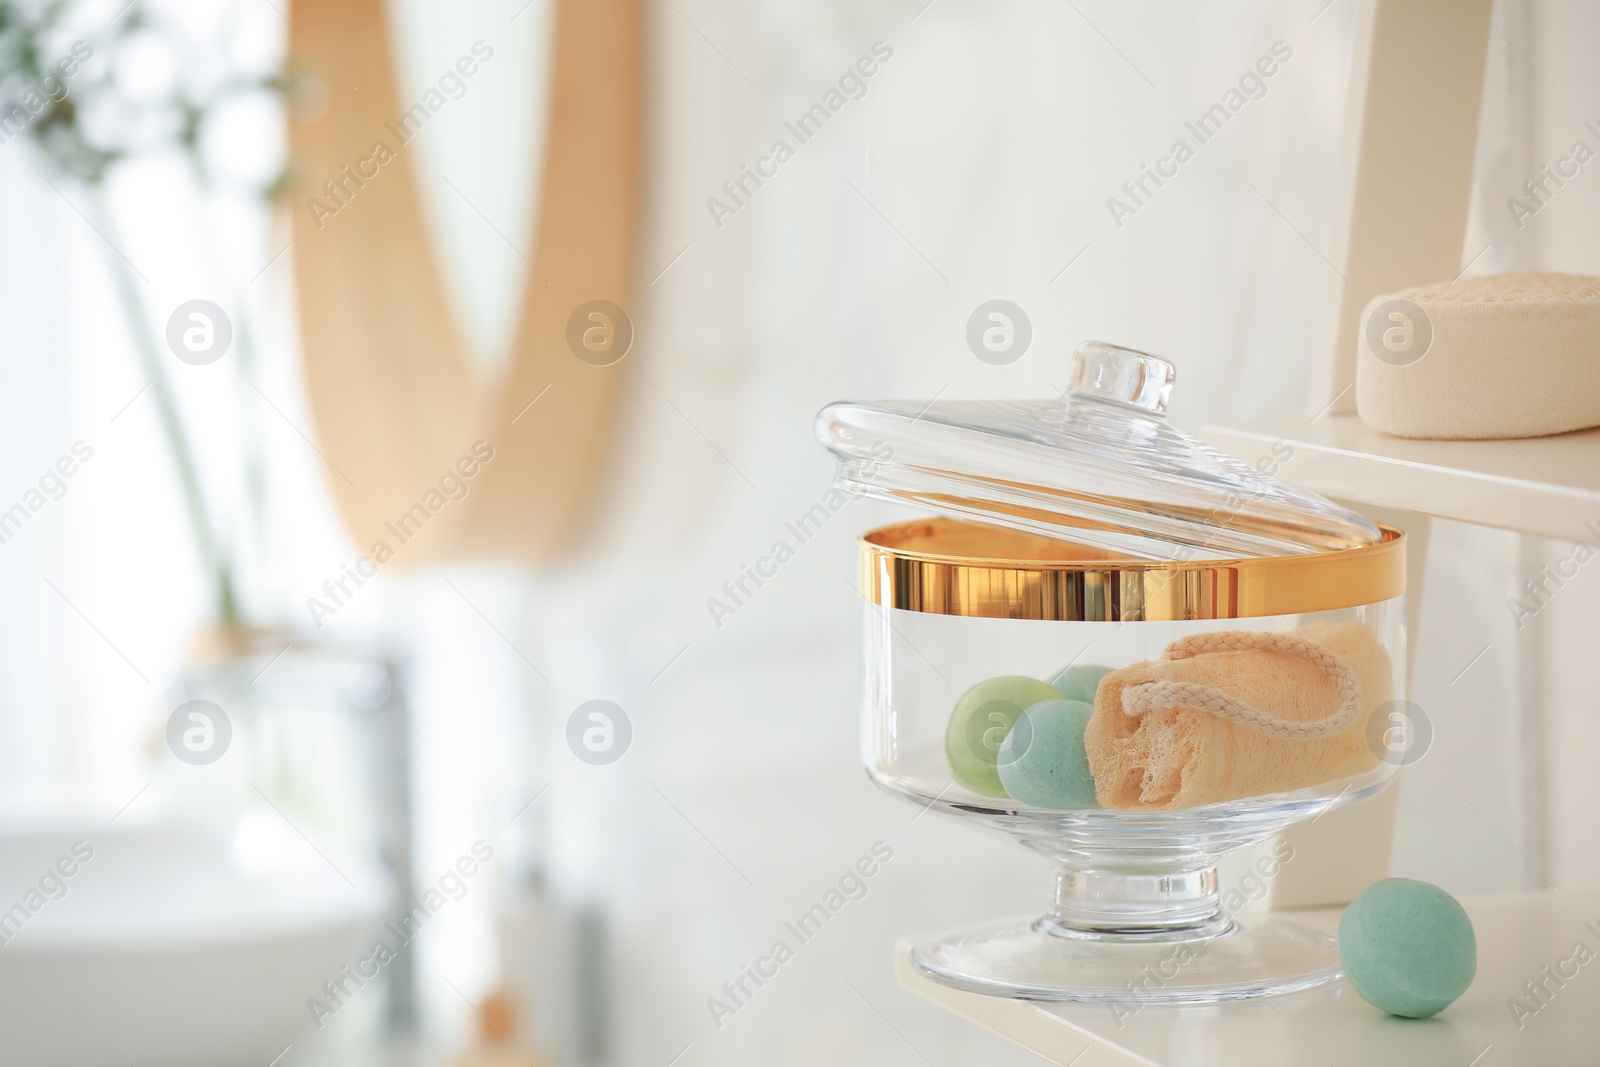 Photo of Jar with bath bombs and loofah sponge on shelving unit in bathroom